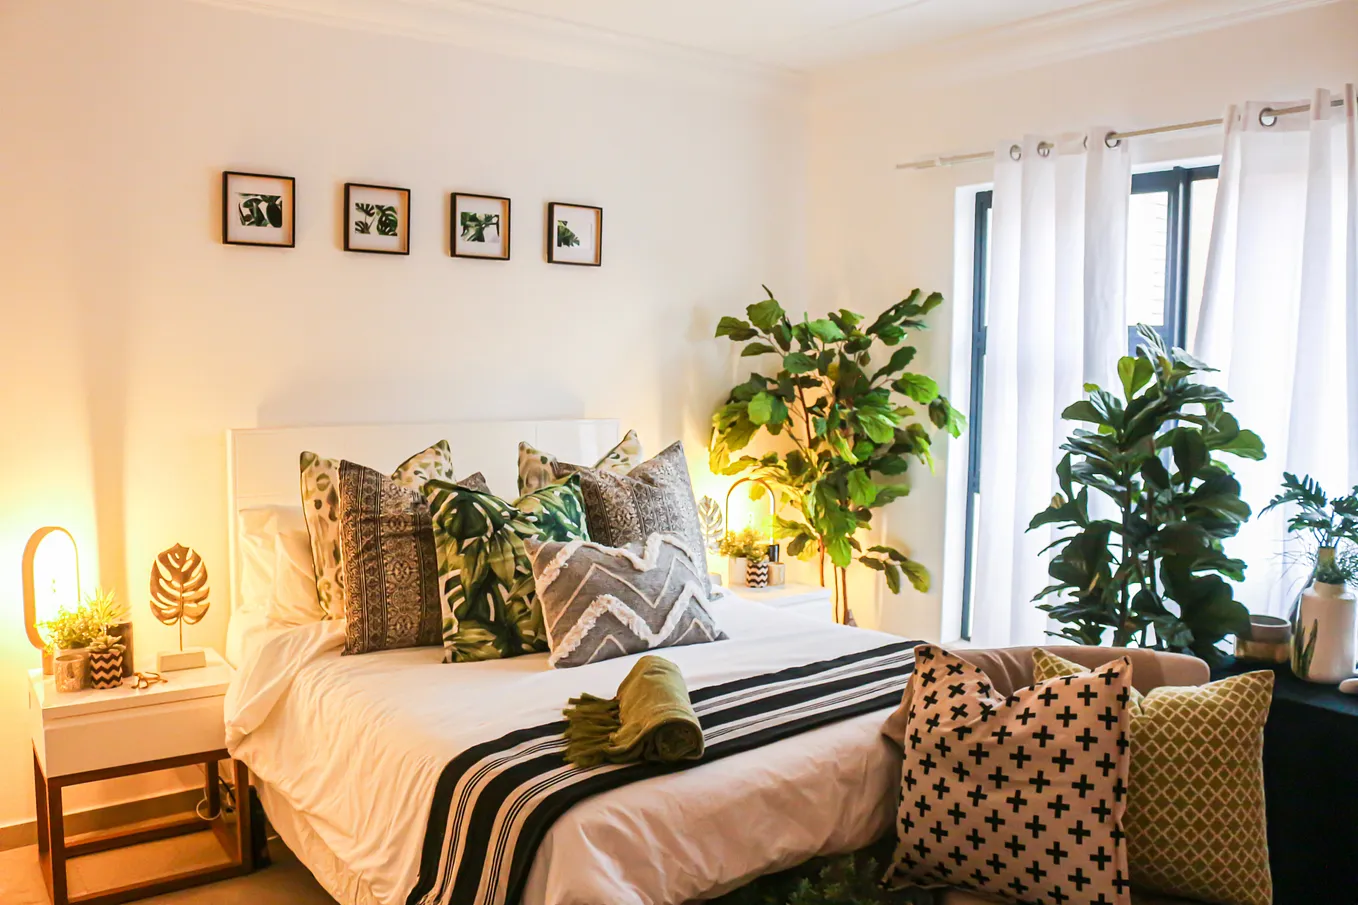 Bedroom Detox: How To Create a Clean and Cozy Space